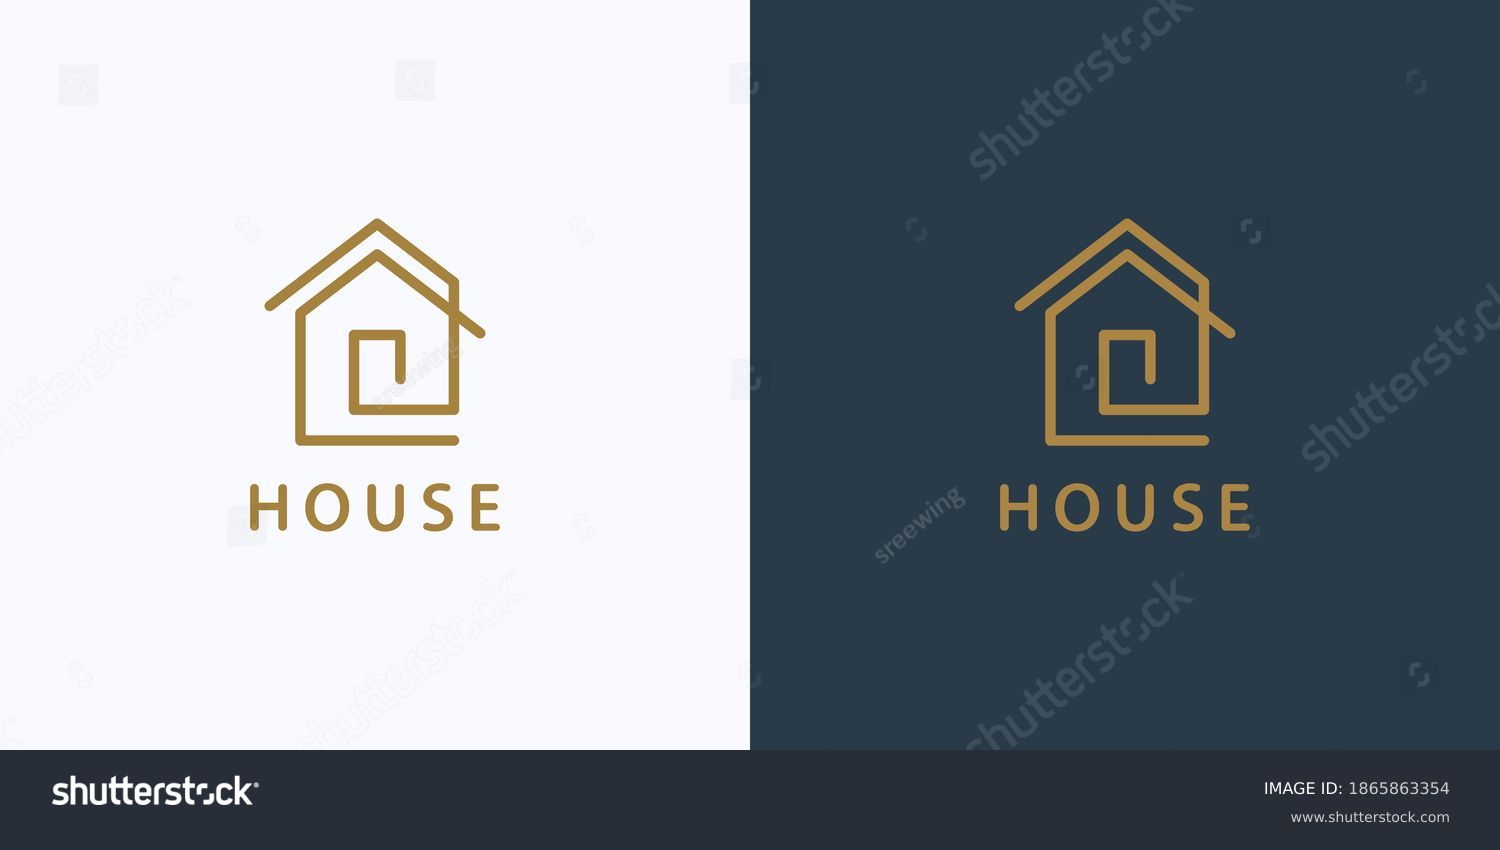 SVG of House Logo. Gold House Symbol Geometric Linear Style isolated on Double Background. Usable for Real Estate, Construction, Architecture and Building Logos. Flat Vector Logo Design Template Element. svg